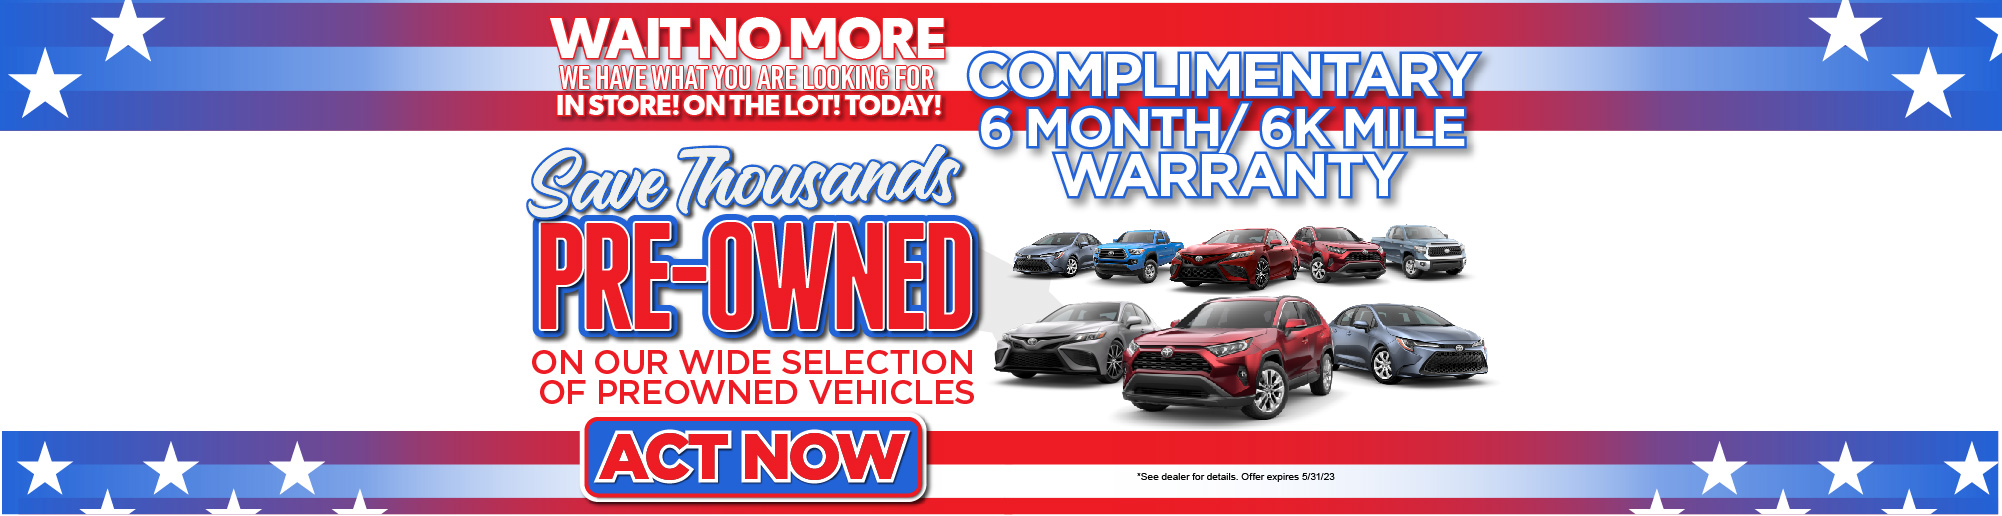 Pre-Owned Save Thousands! Act Now! On Our Wide Selection of Pre-Owned Models| Complimentary 6 month/6K Mile Warranty